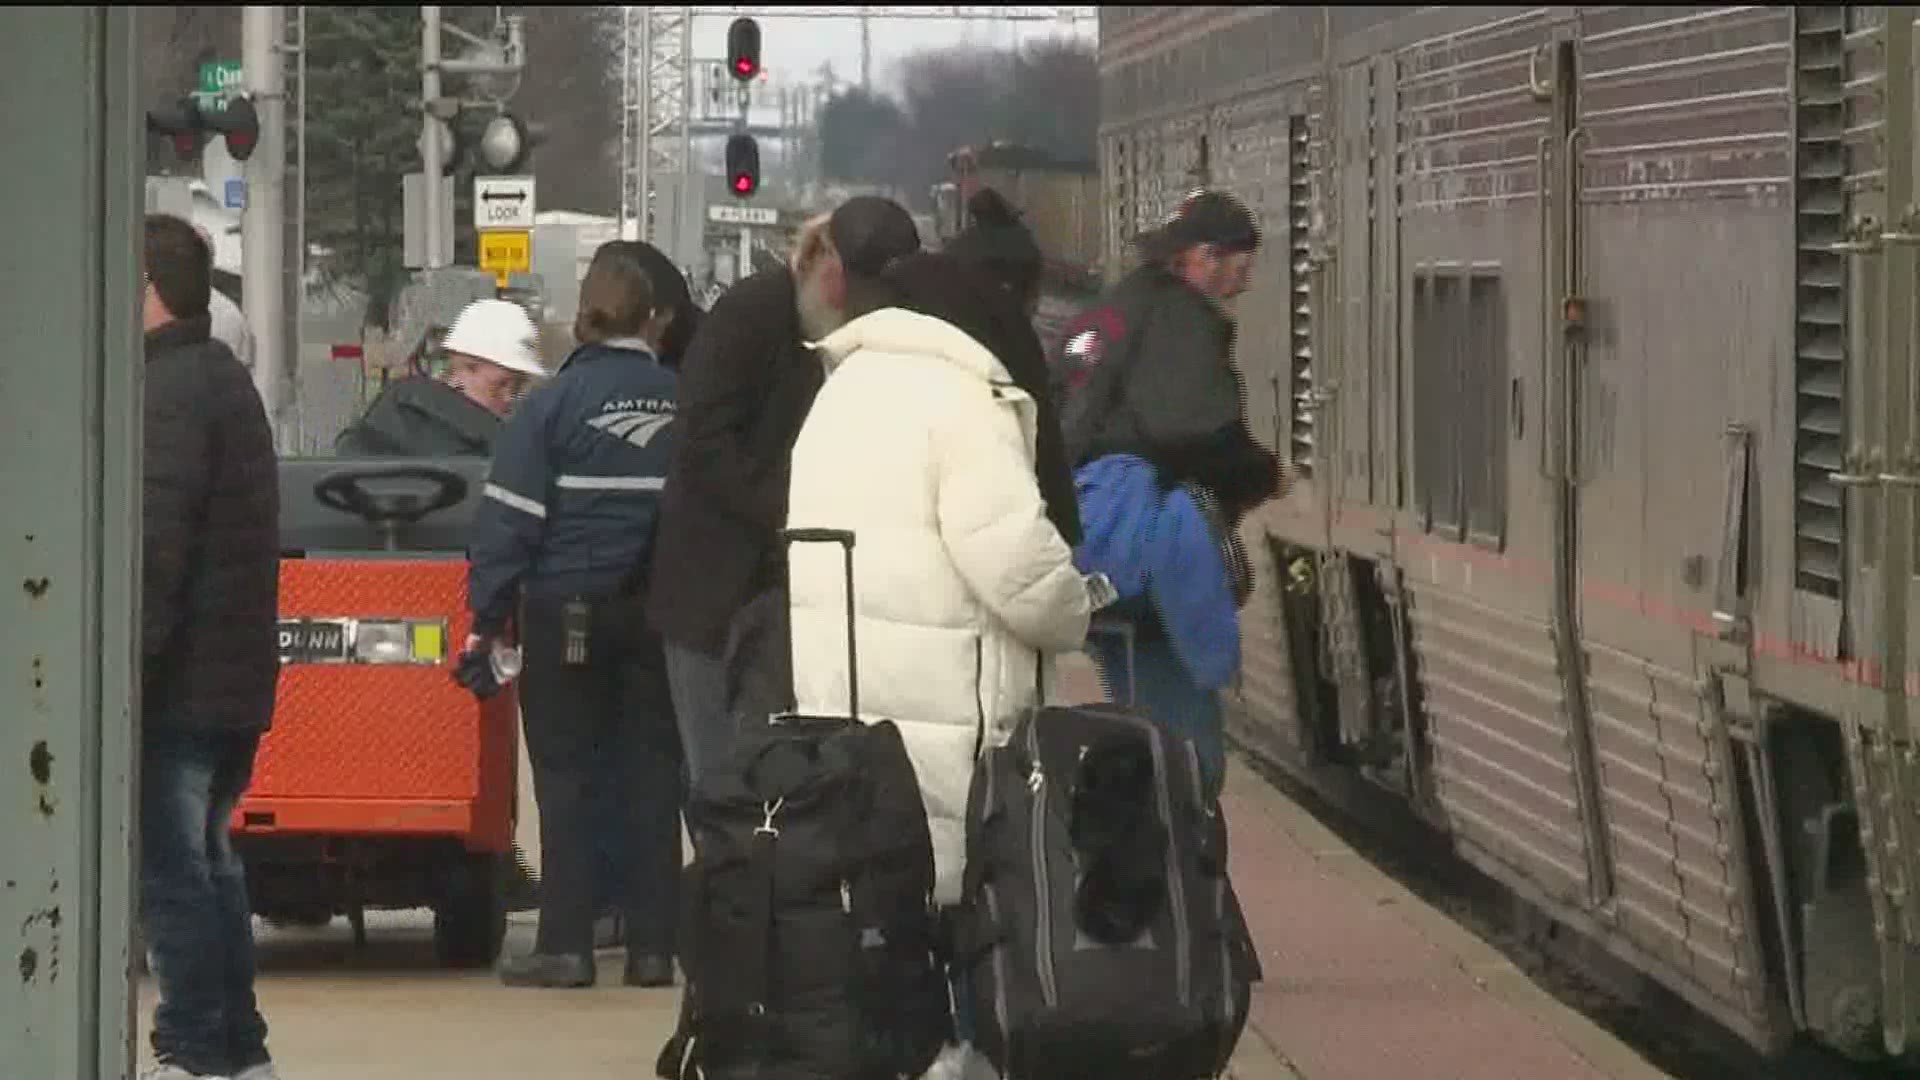 Amtrak is seeing a significant reduction in its ridership, but some travelers are still taking a chance to travel by train.